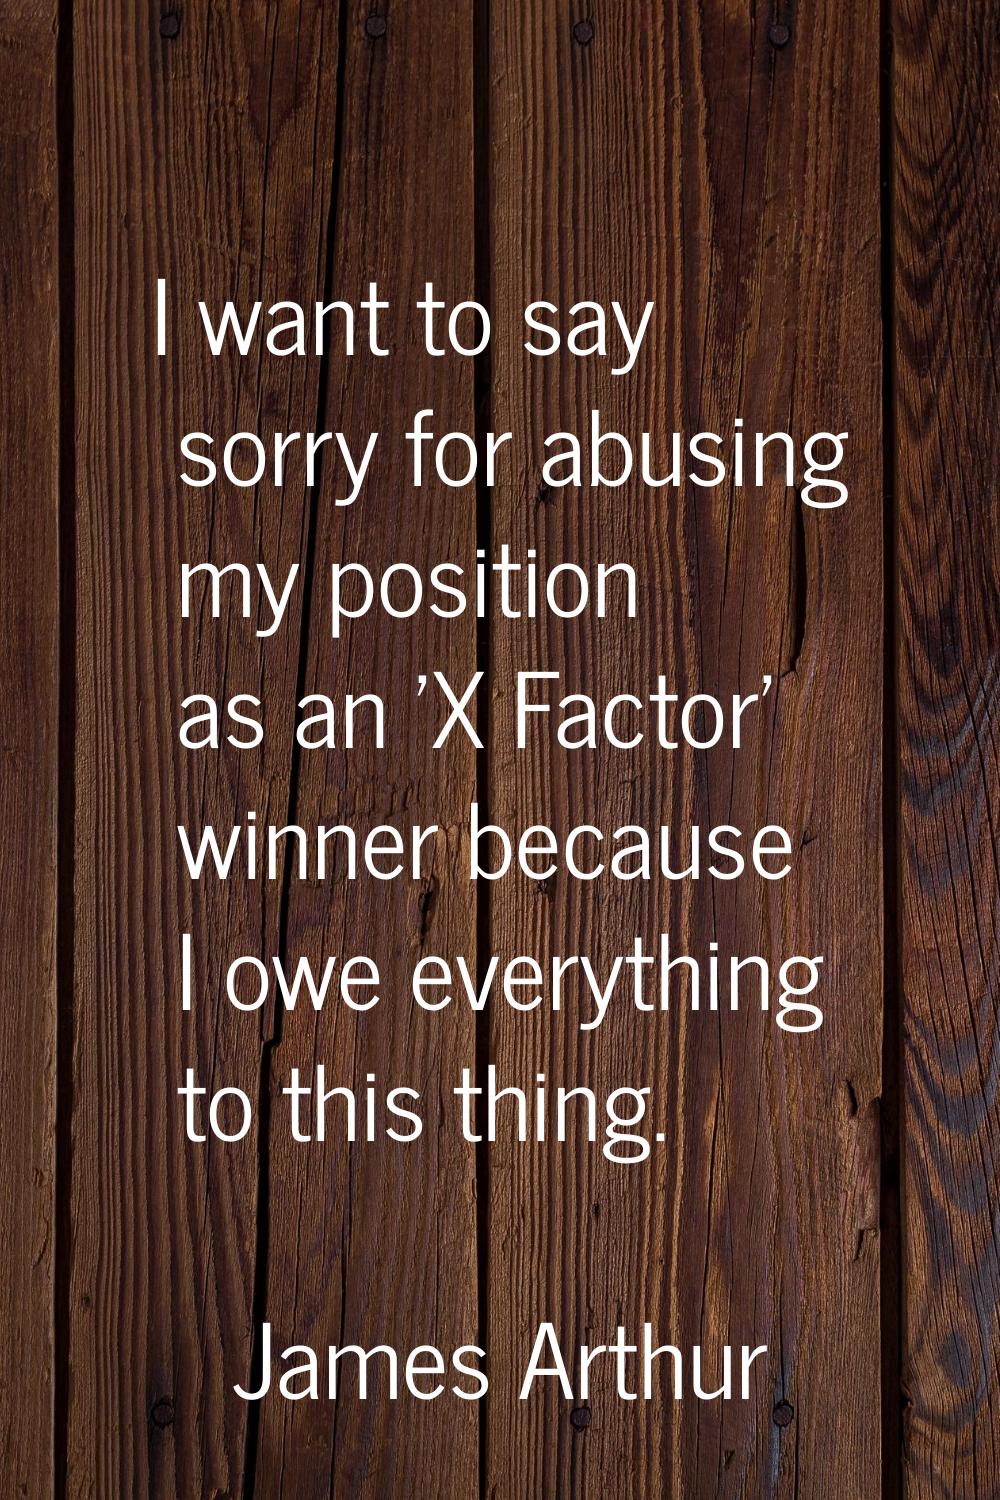 I want to say sorry for abusing my position as an 'X Factor' winner because I owe everything to thi